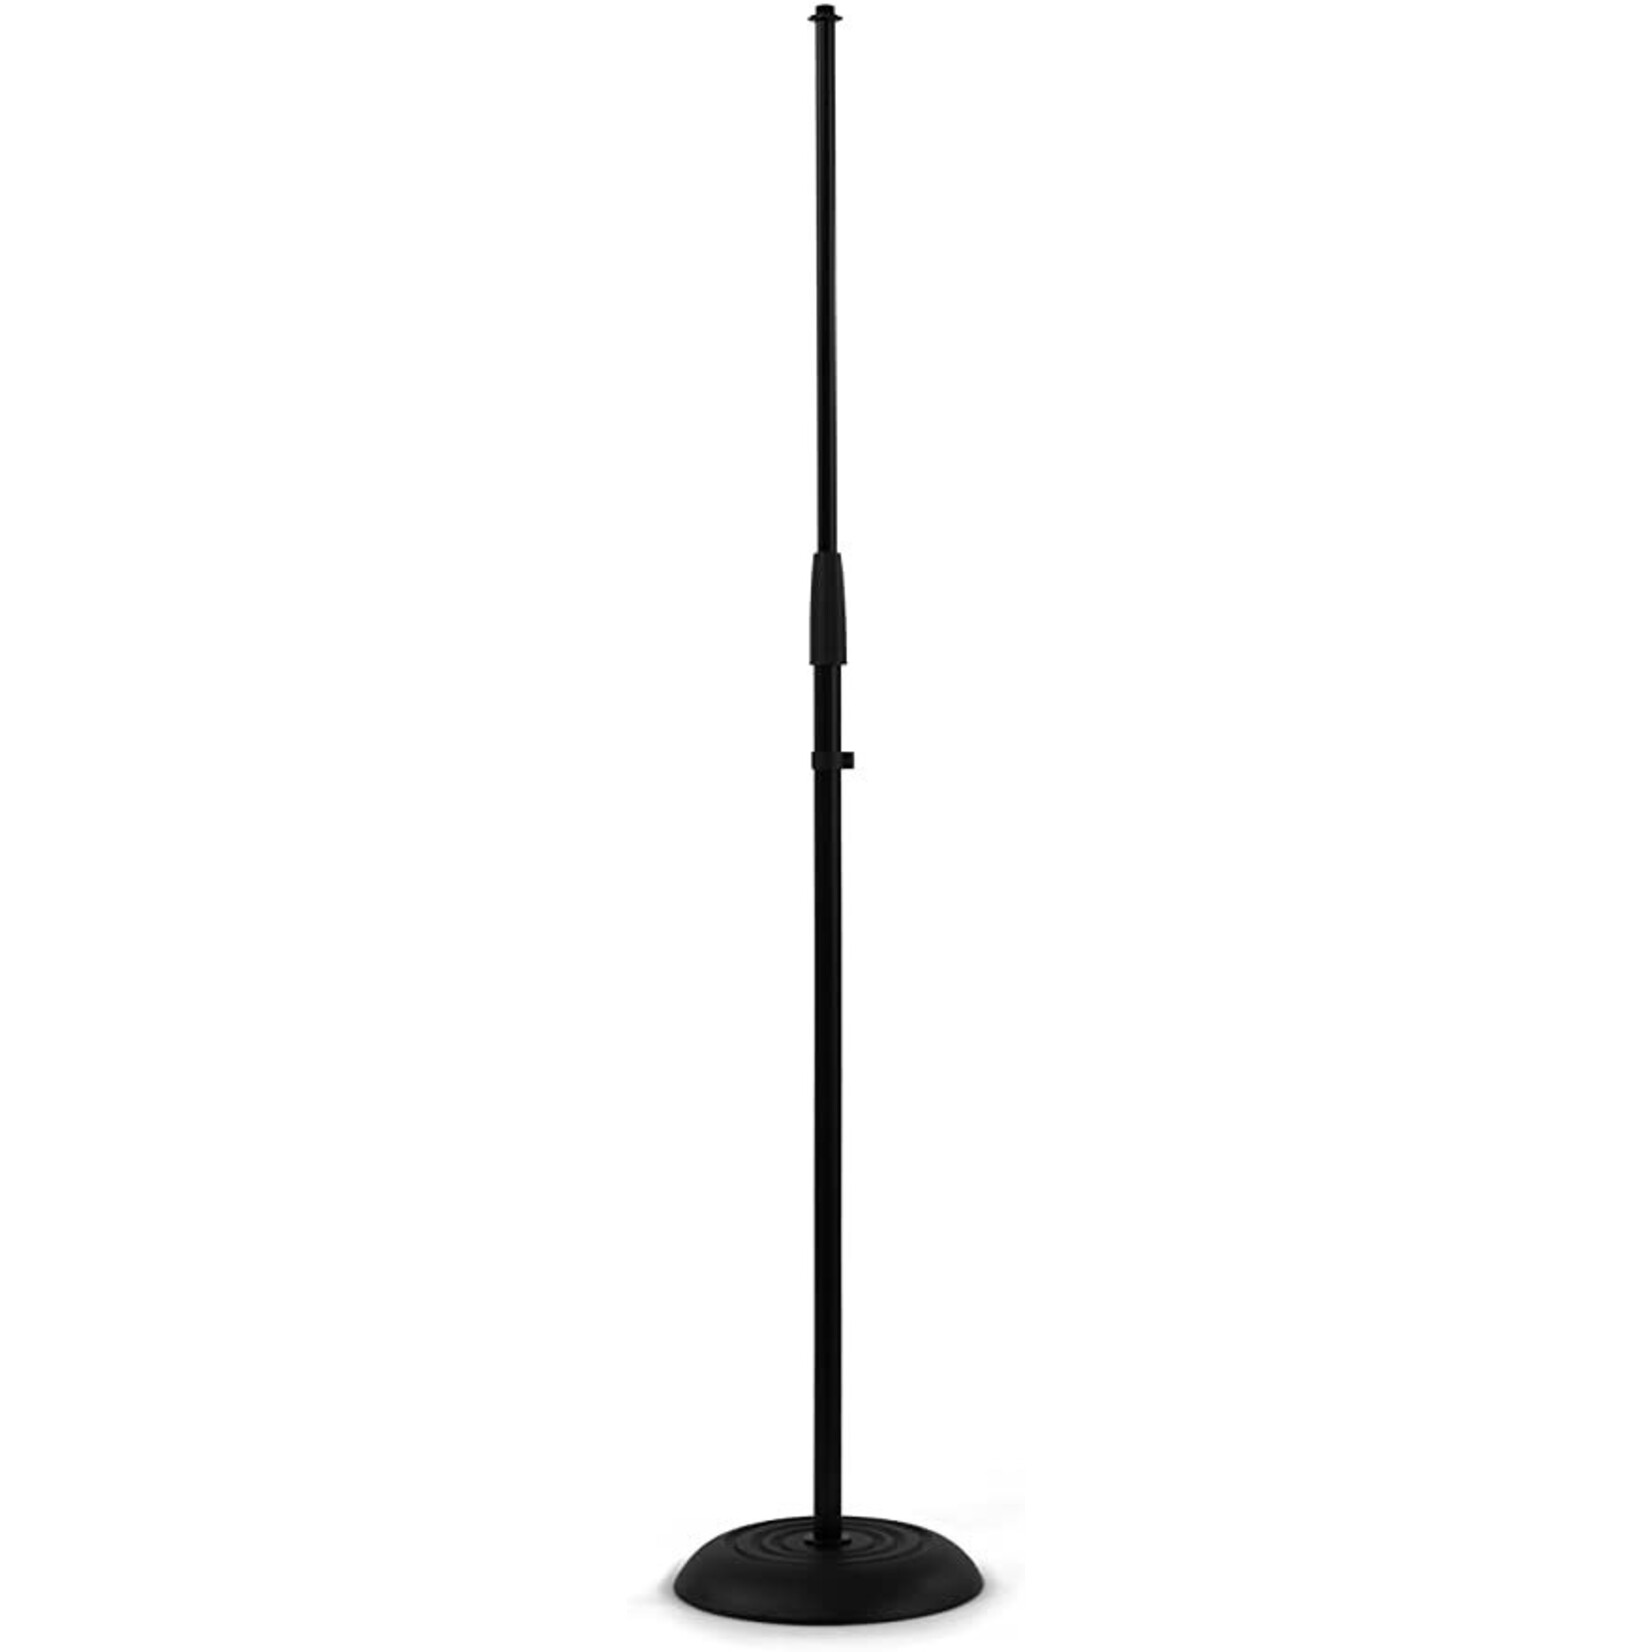 Nomad NMS-6603 Round Base Microphone Stand - Black